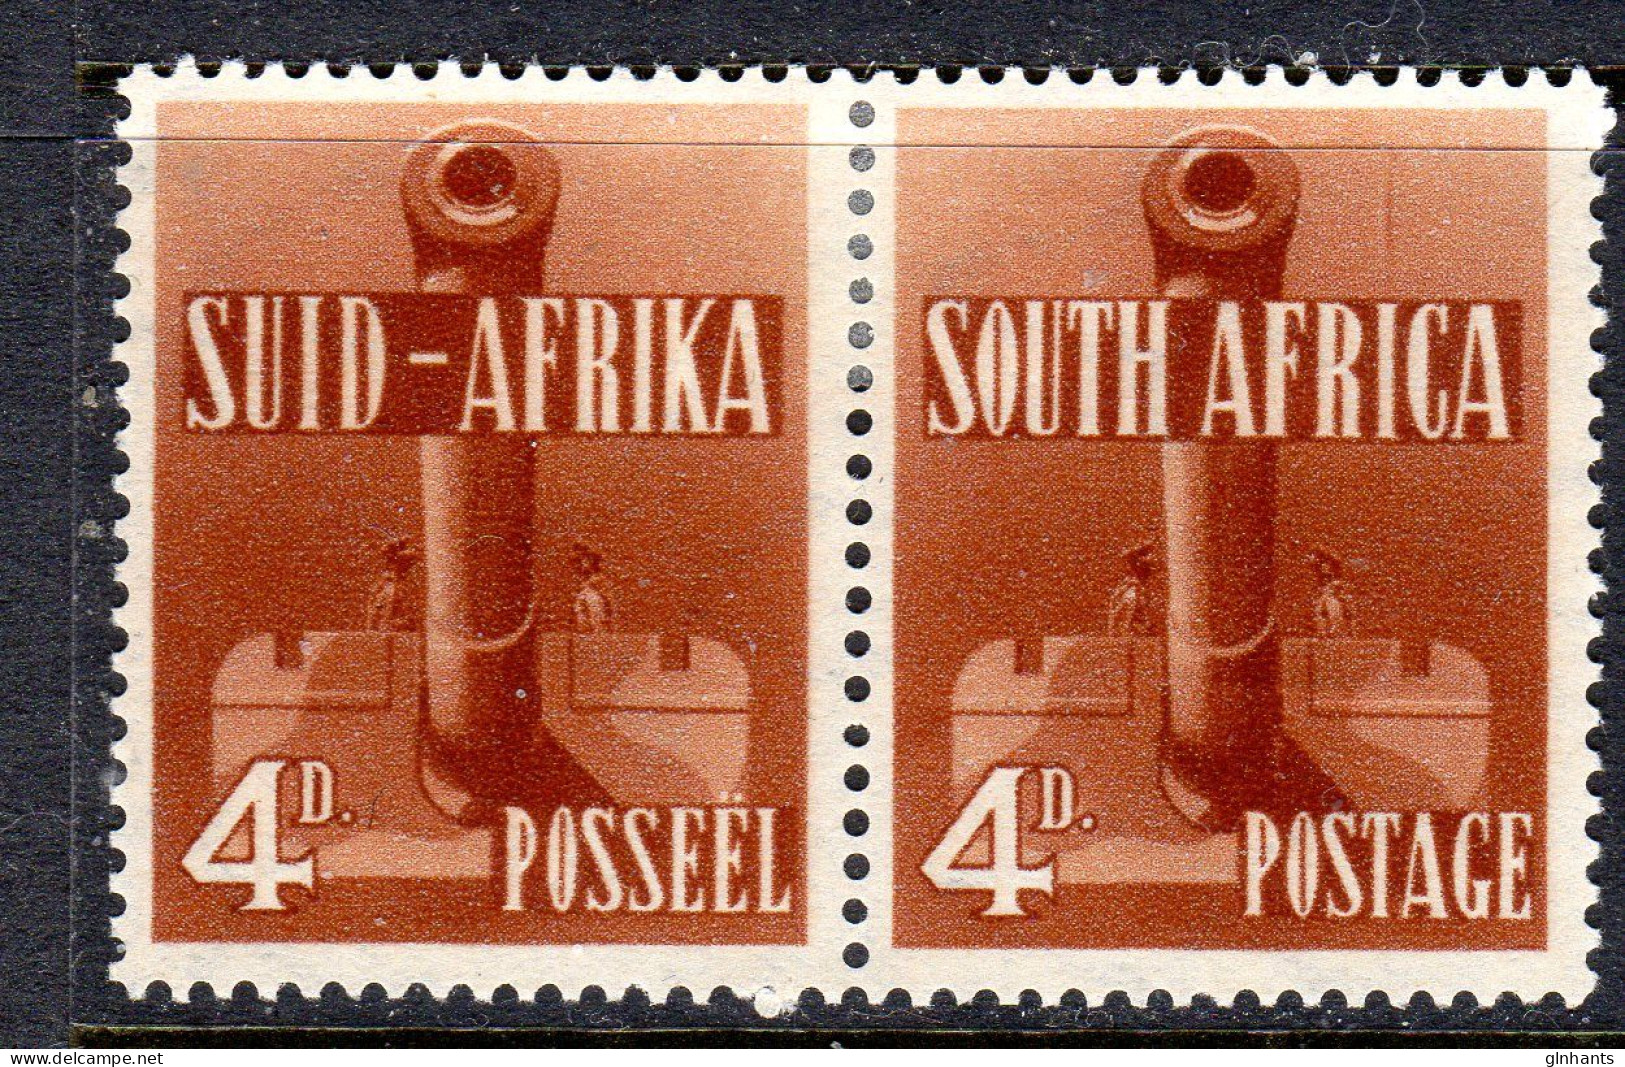 SOUTH AFRICA - 1941 GUNS 4d STAMP PAIR FINE MOUNTED MINT MM * SG 92 - Unused Stamps